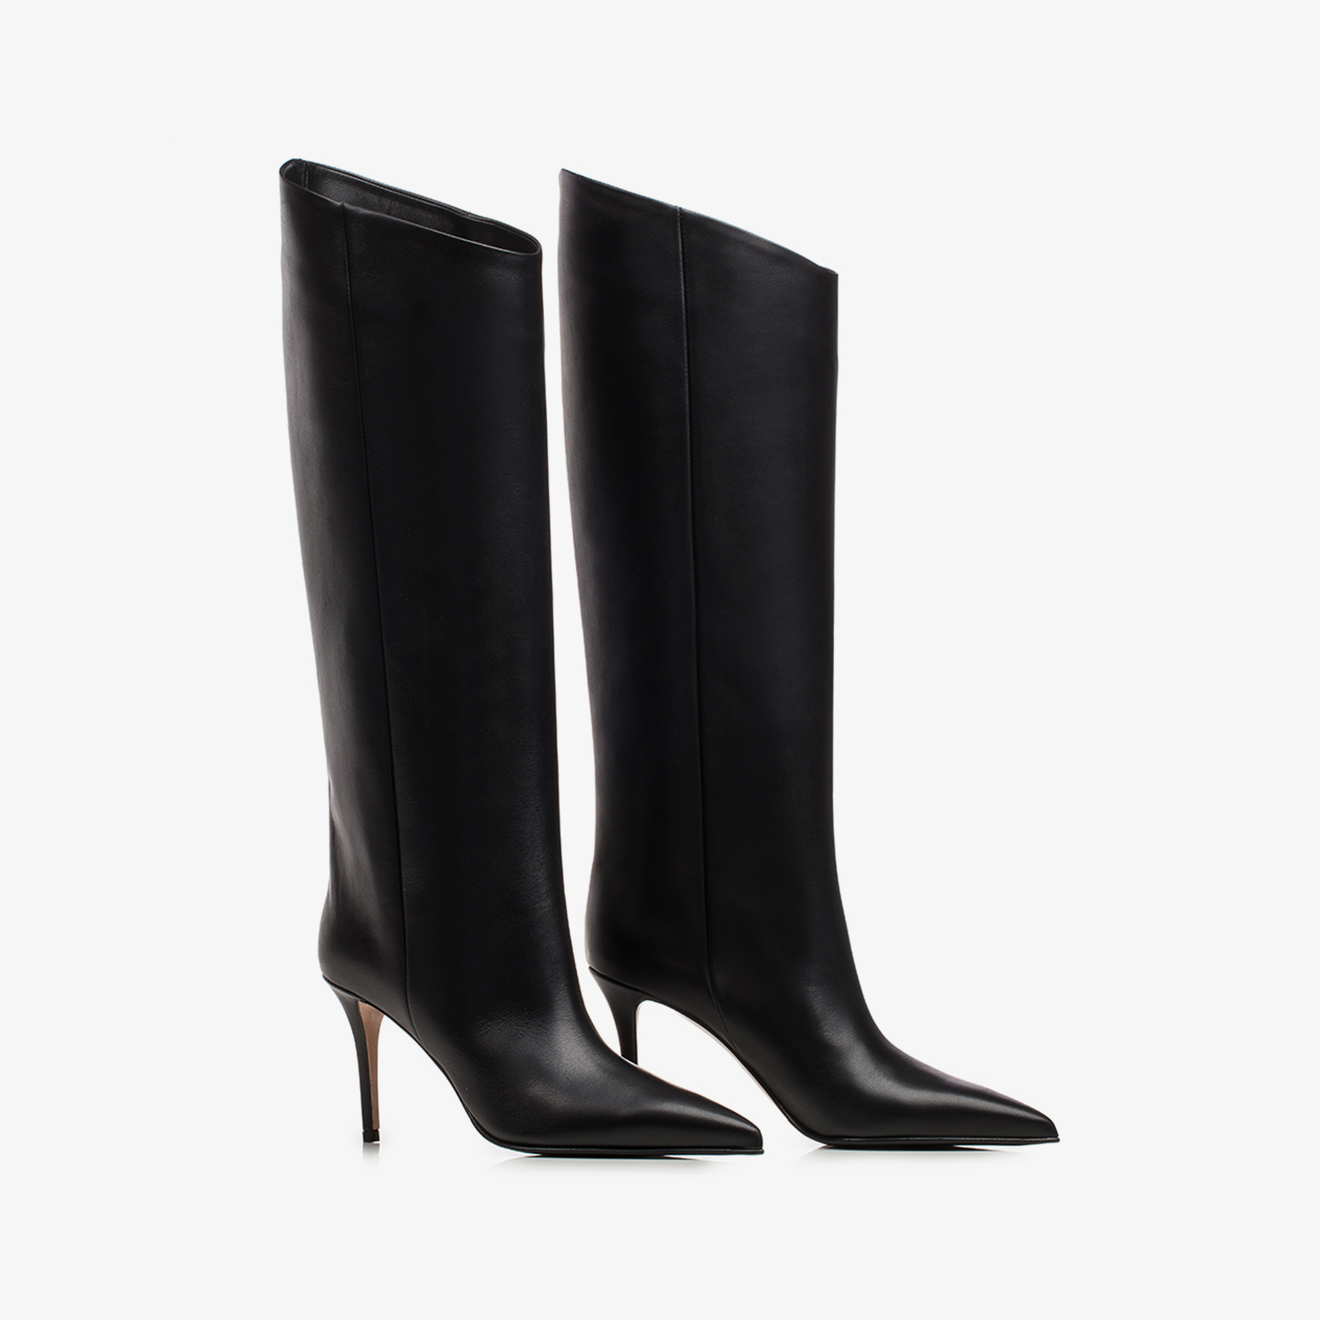 EVA BOOT 90 mm - Le Silla official outlet